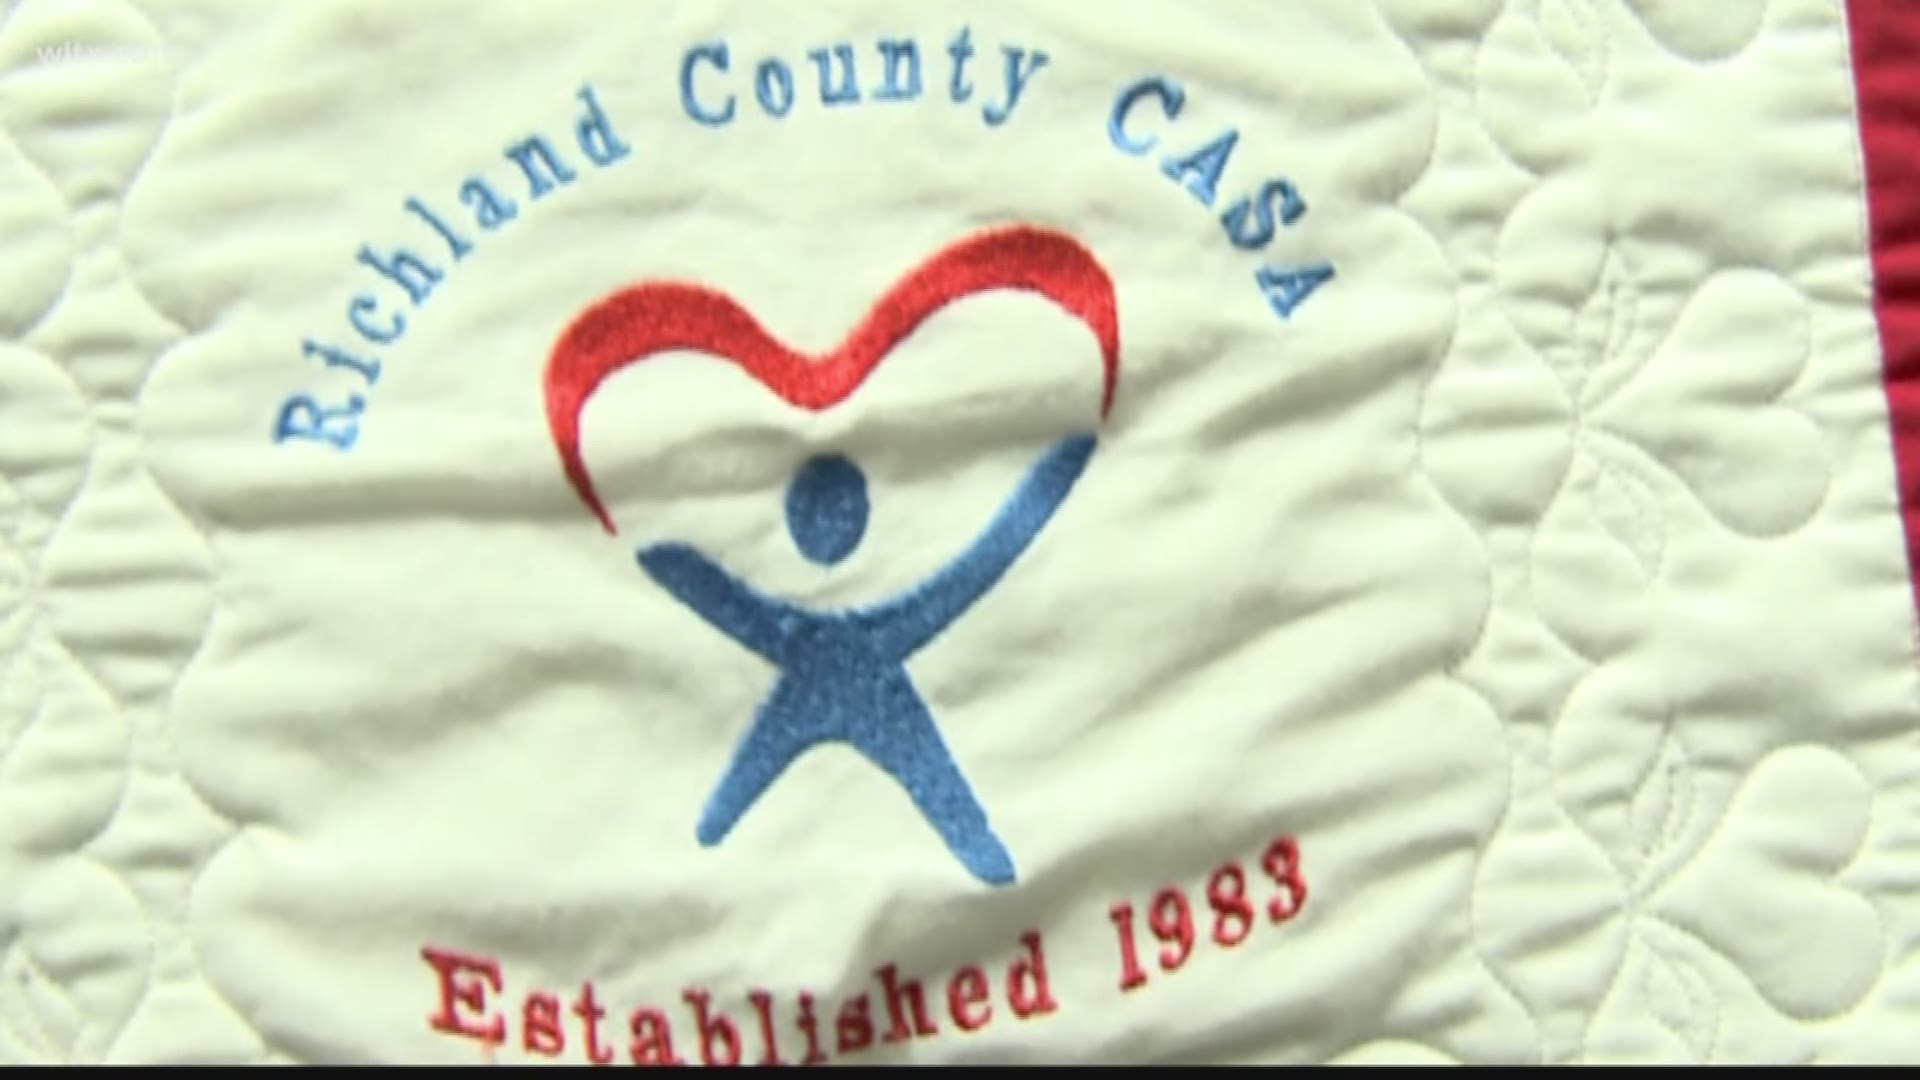 Richland County CASA is making a big difference in the lives of children in the community.